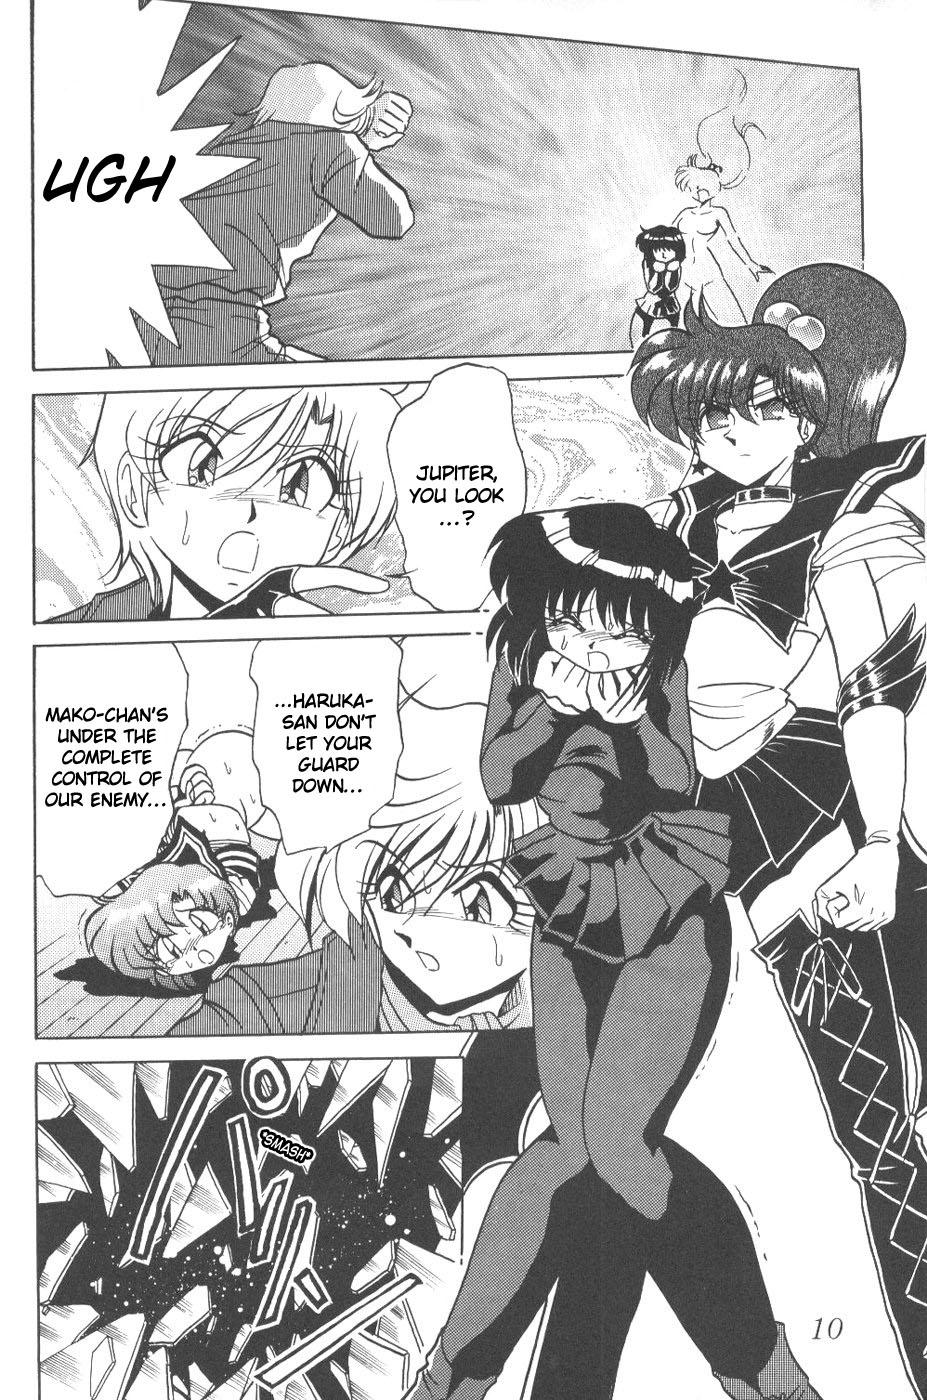 Ghetto Silent Saturn 6 - Sailor moon Gay Emo - Page 8